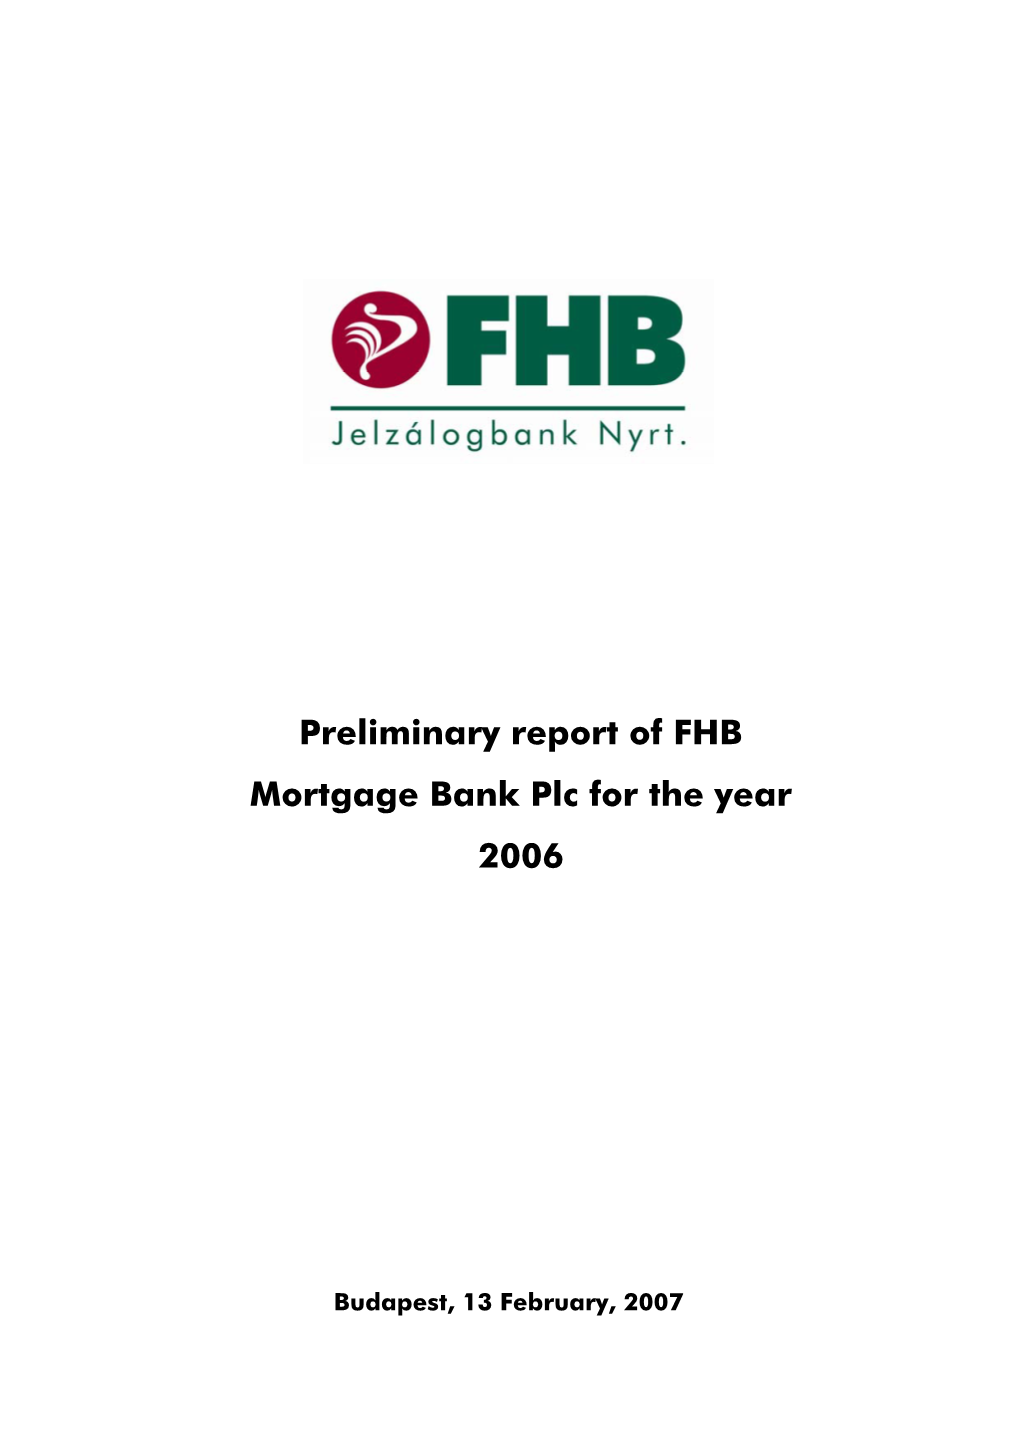 Preliminary Report of FHB Mortgage Bank Plc for the Year 2006